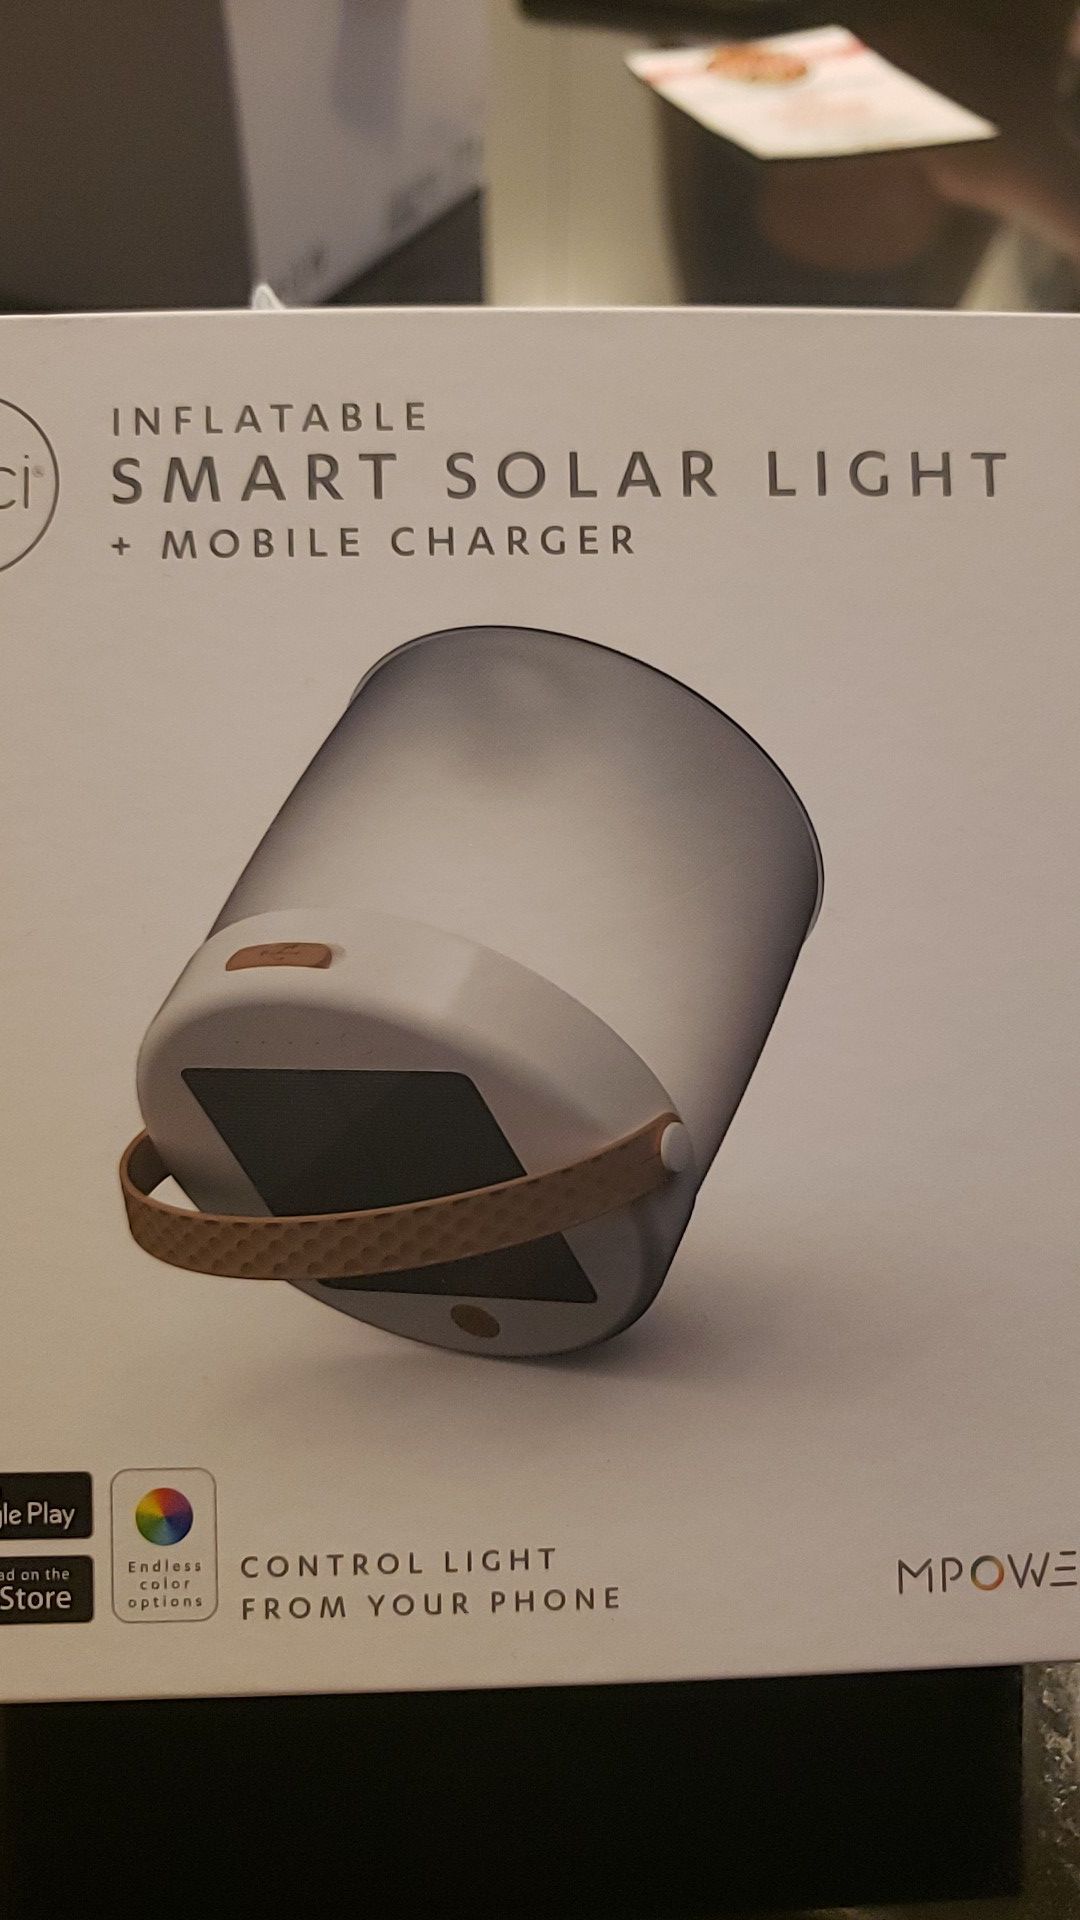 Luci conect smart solar light, can be controled by the app or manual